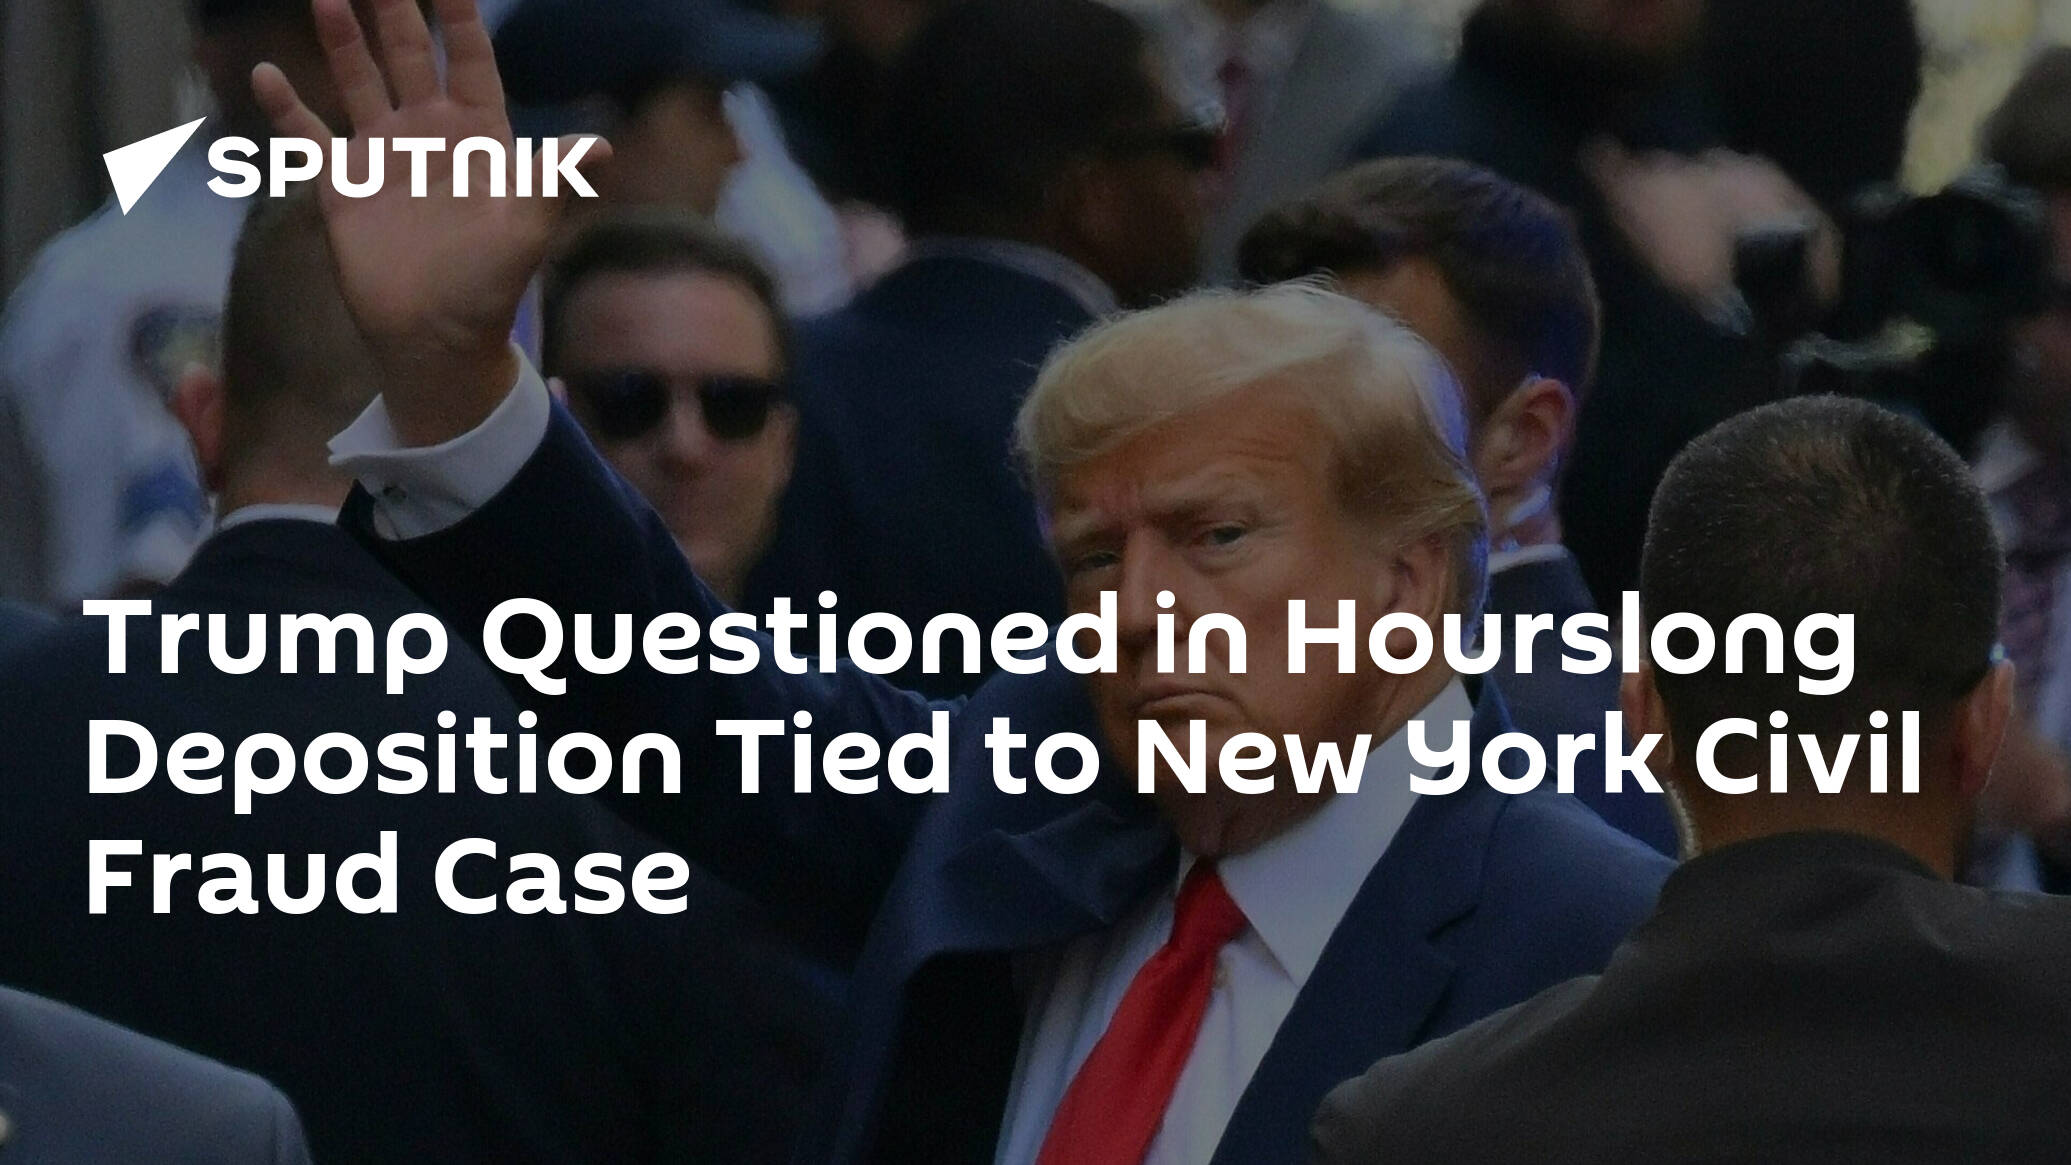 Trump Questioned in Hourslong Deposition Tied to New York Civil Fraud Case